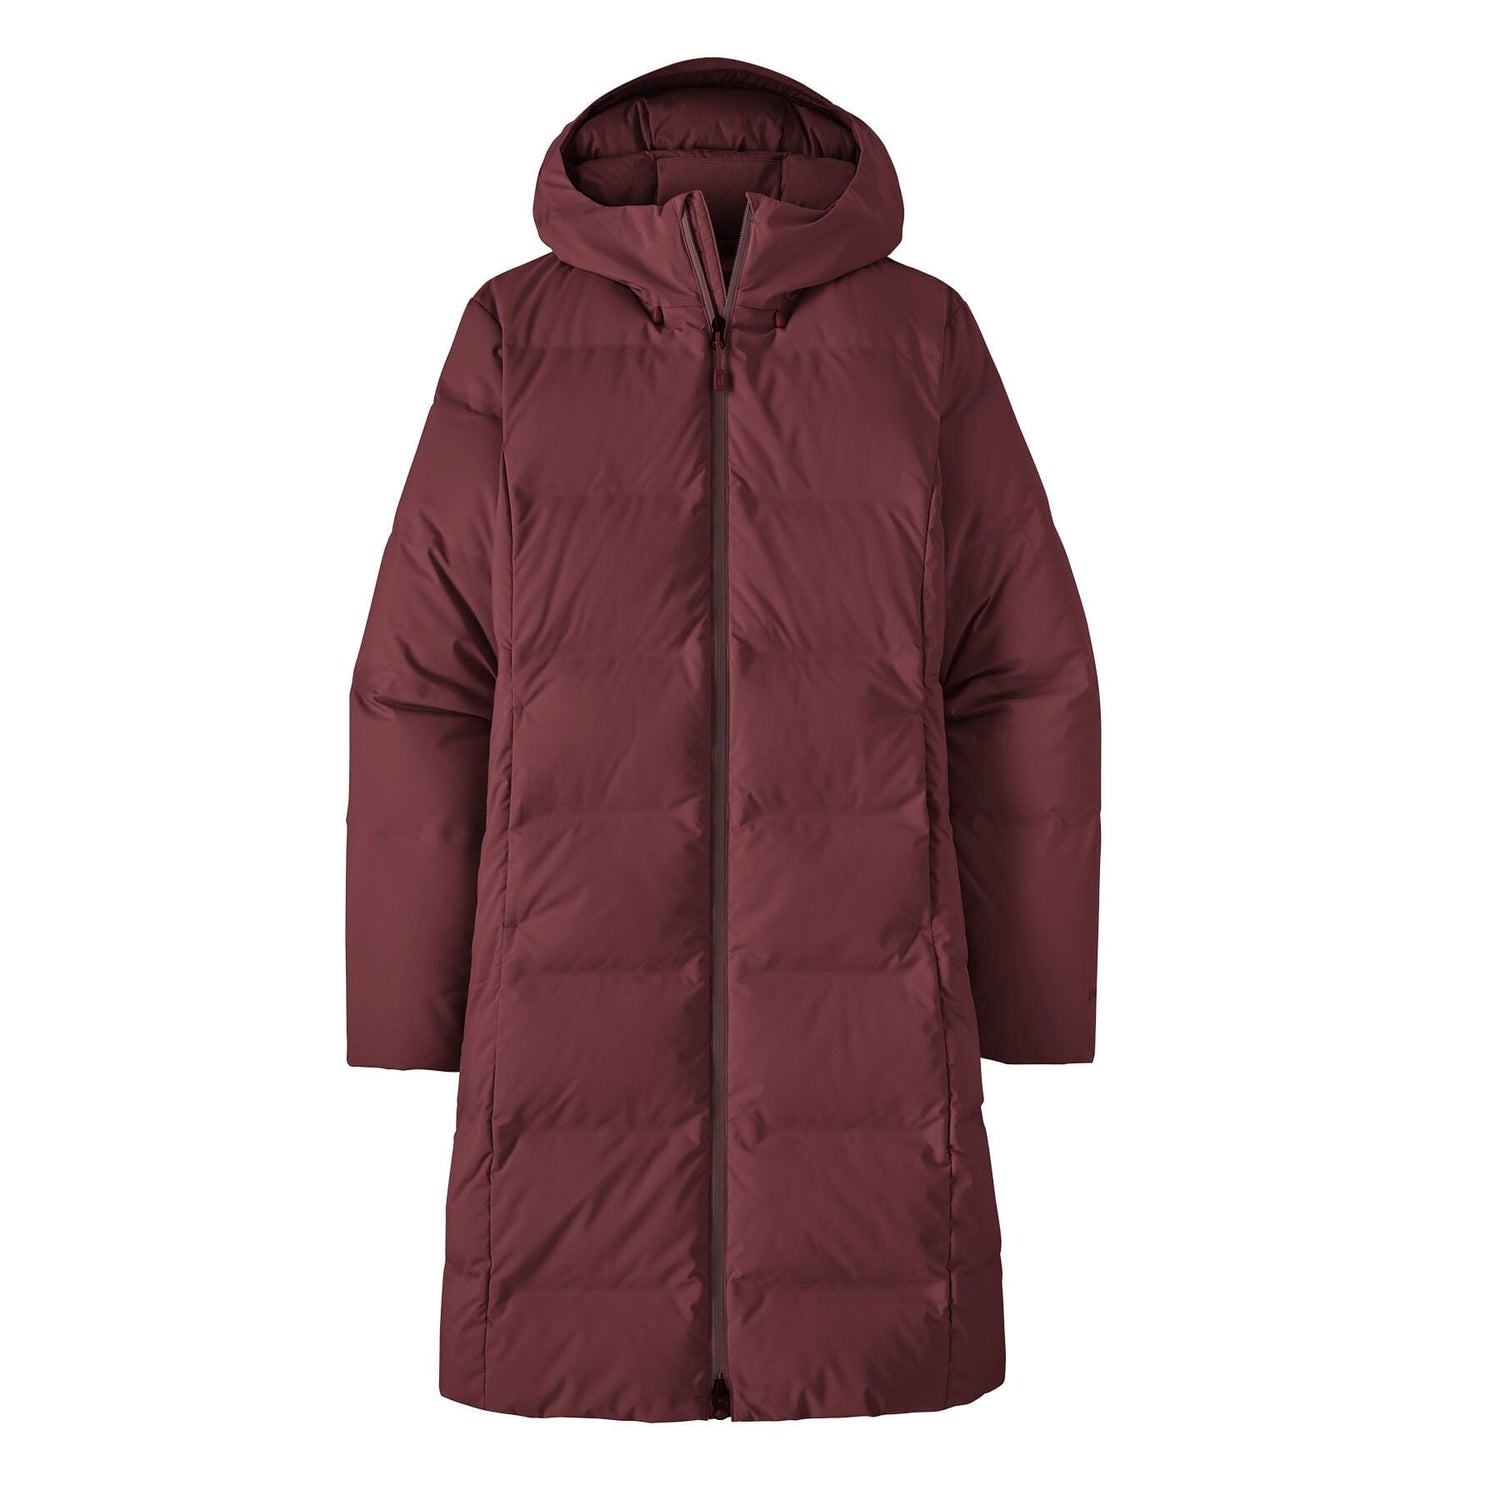 Patagonia W's Jackson Glacier Parka - Recycled Down / Recycled Polyester Carmine Red Jacket